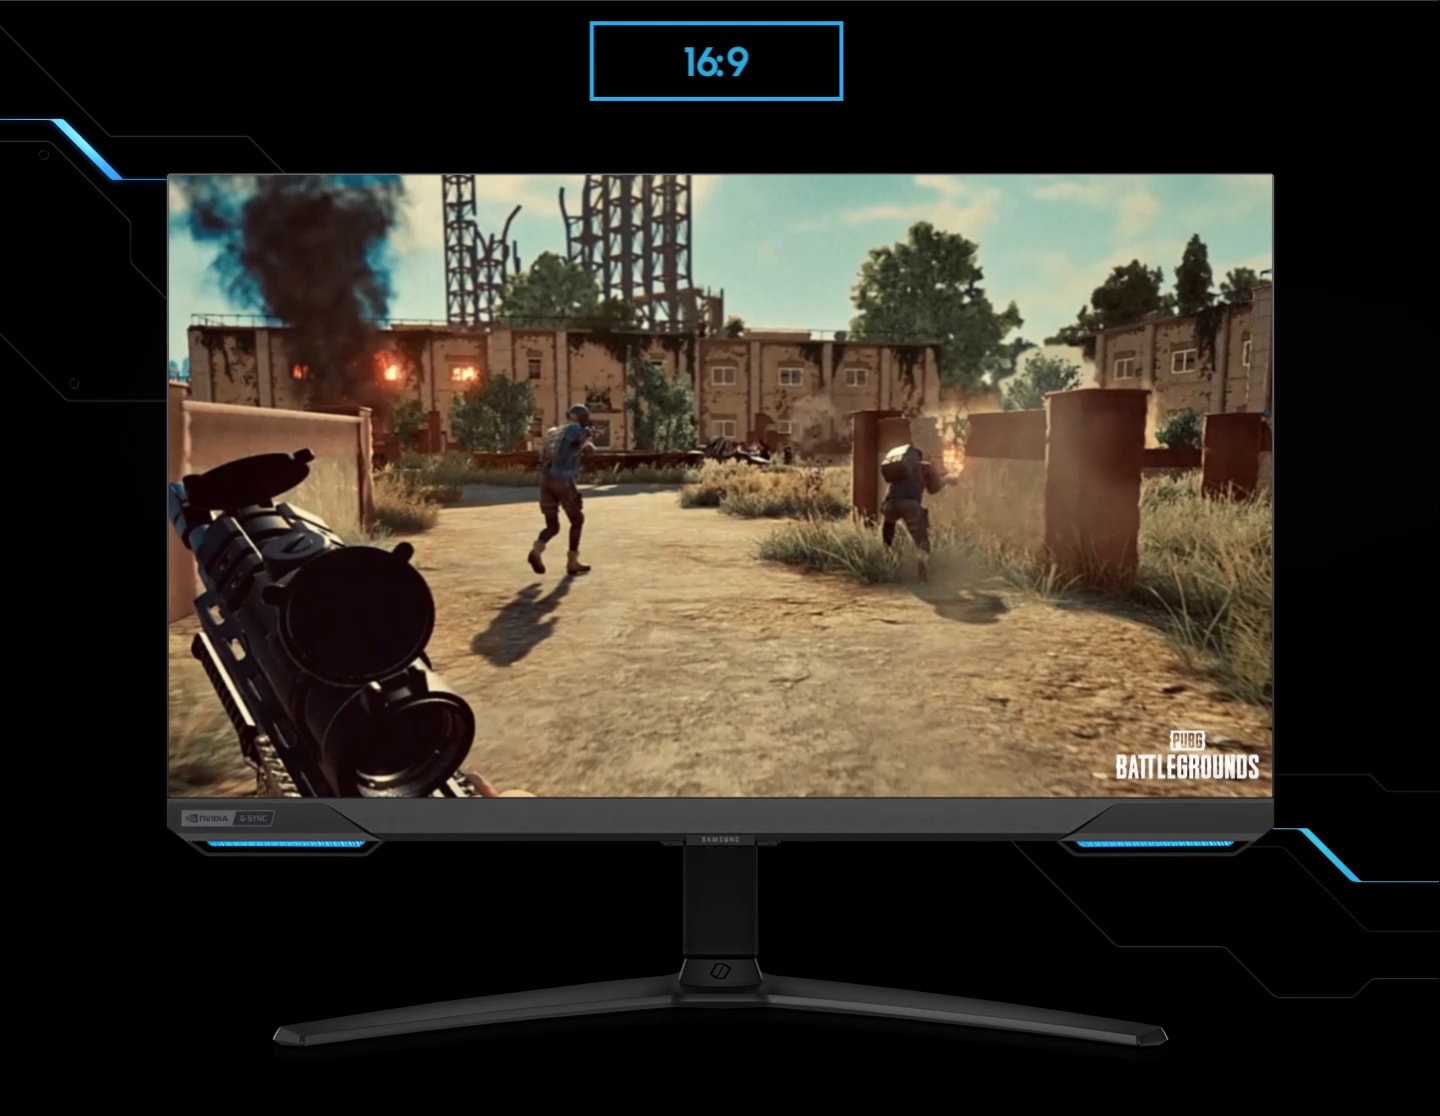 A monitor shows the perspective of a player within a first-person action game. As the screen is extended from 16:9 to 21:9 proportion, an enemy appears in the far left corner, revealed thanks to the monitor's wider perspective. The game title PUBG BATTLEGROUND is located in the lower right corner.